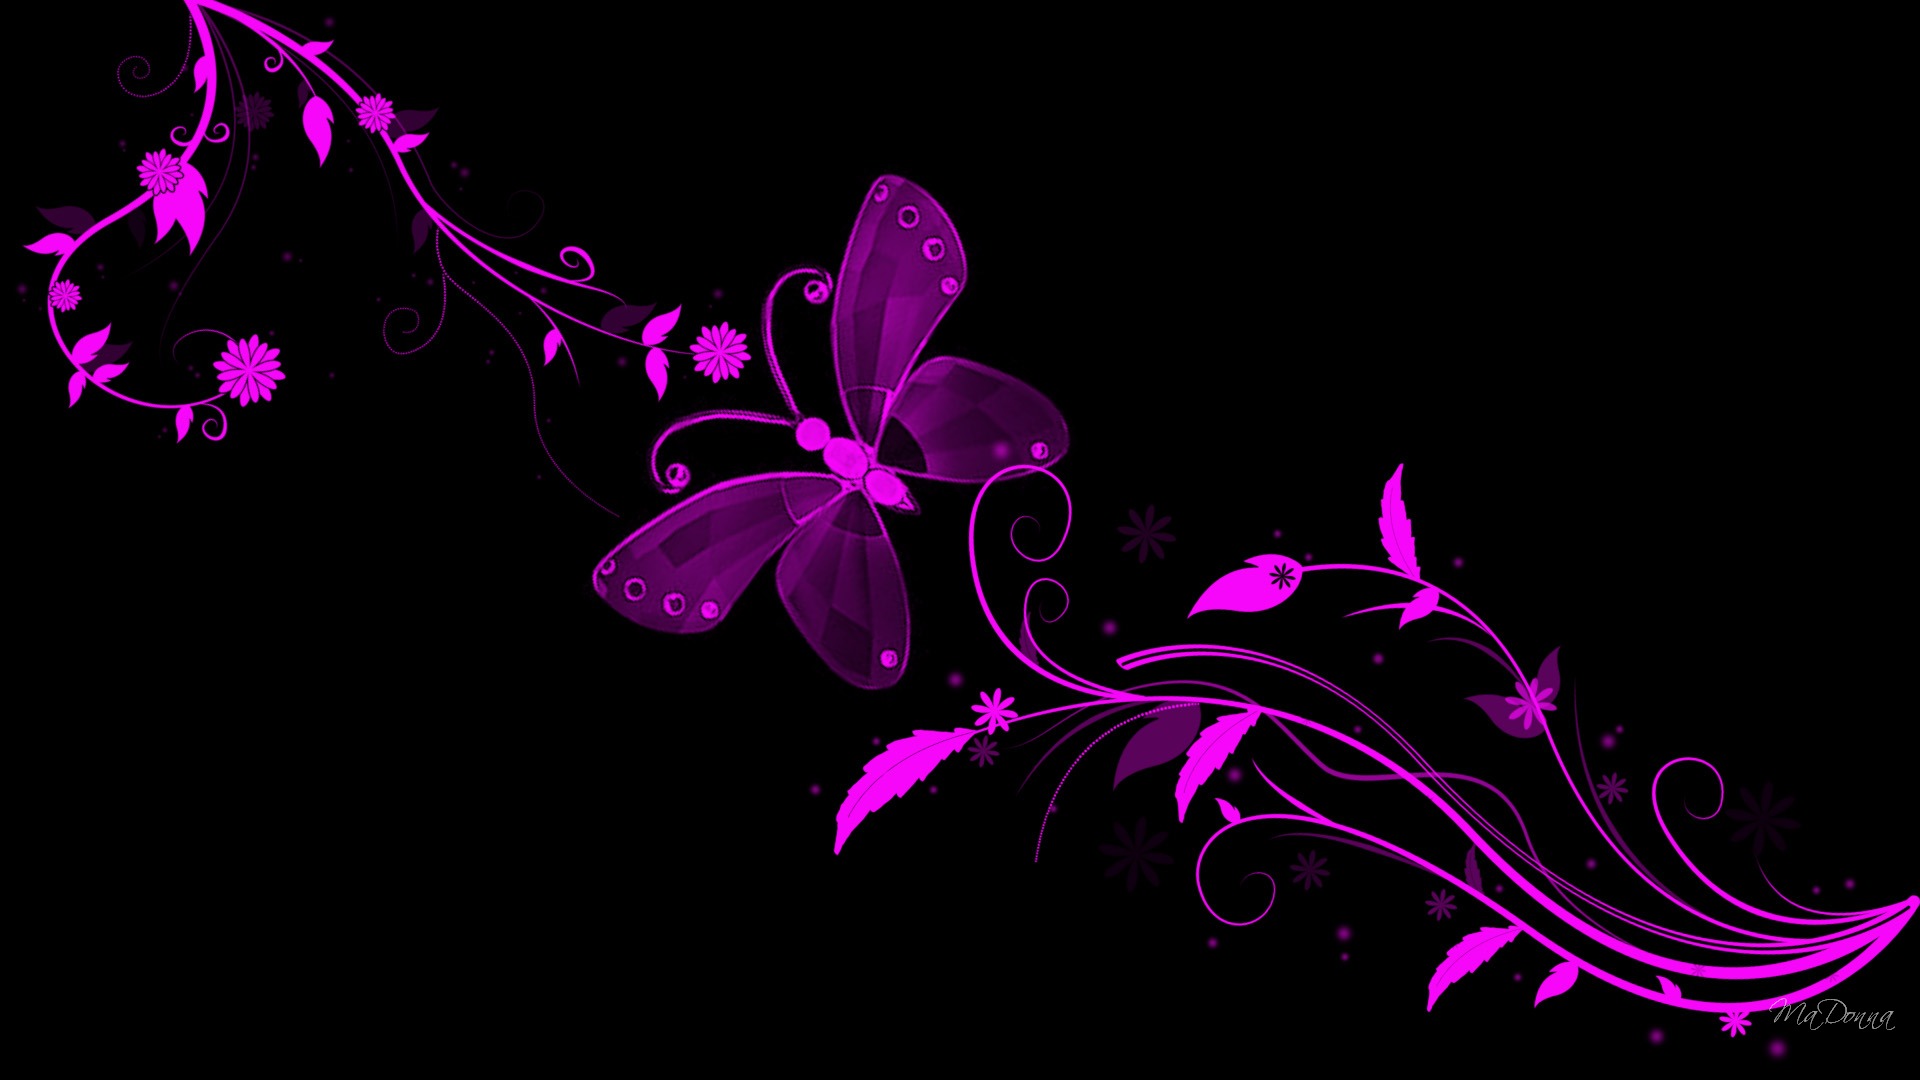 Abstract Flowers Backgrounds 6907 Hd Wallpapers in Flowers   Imagesci